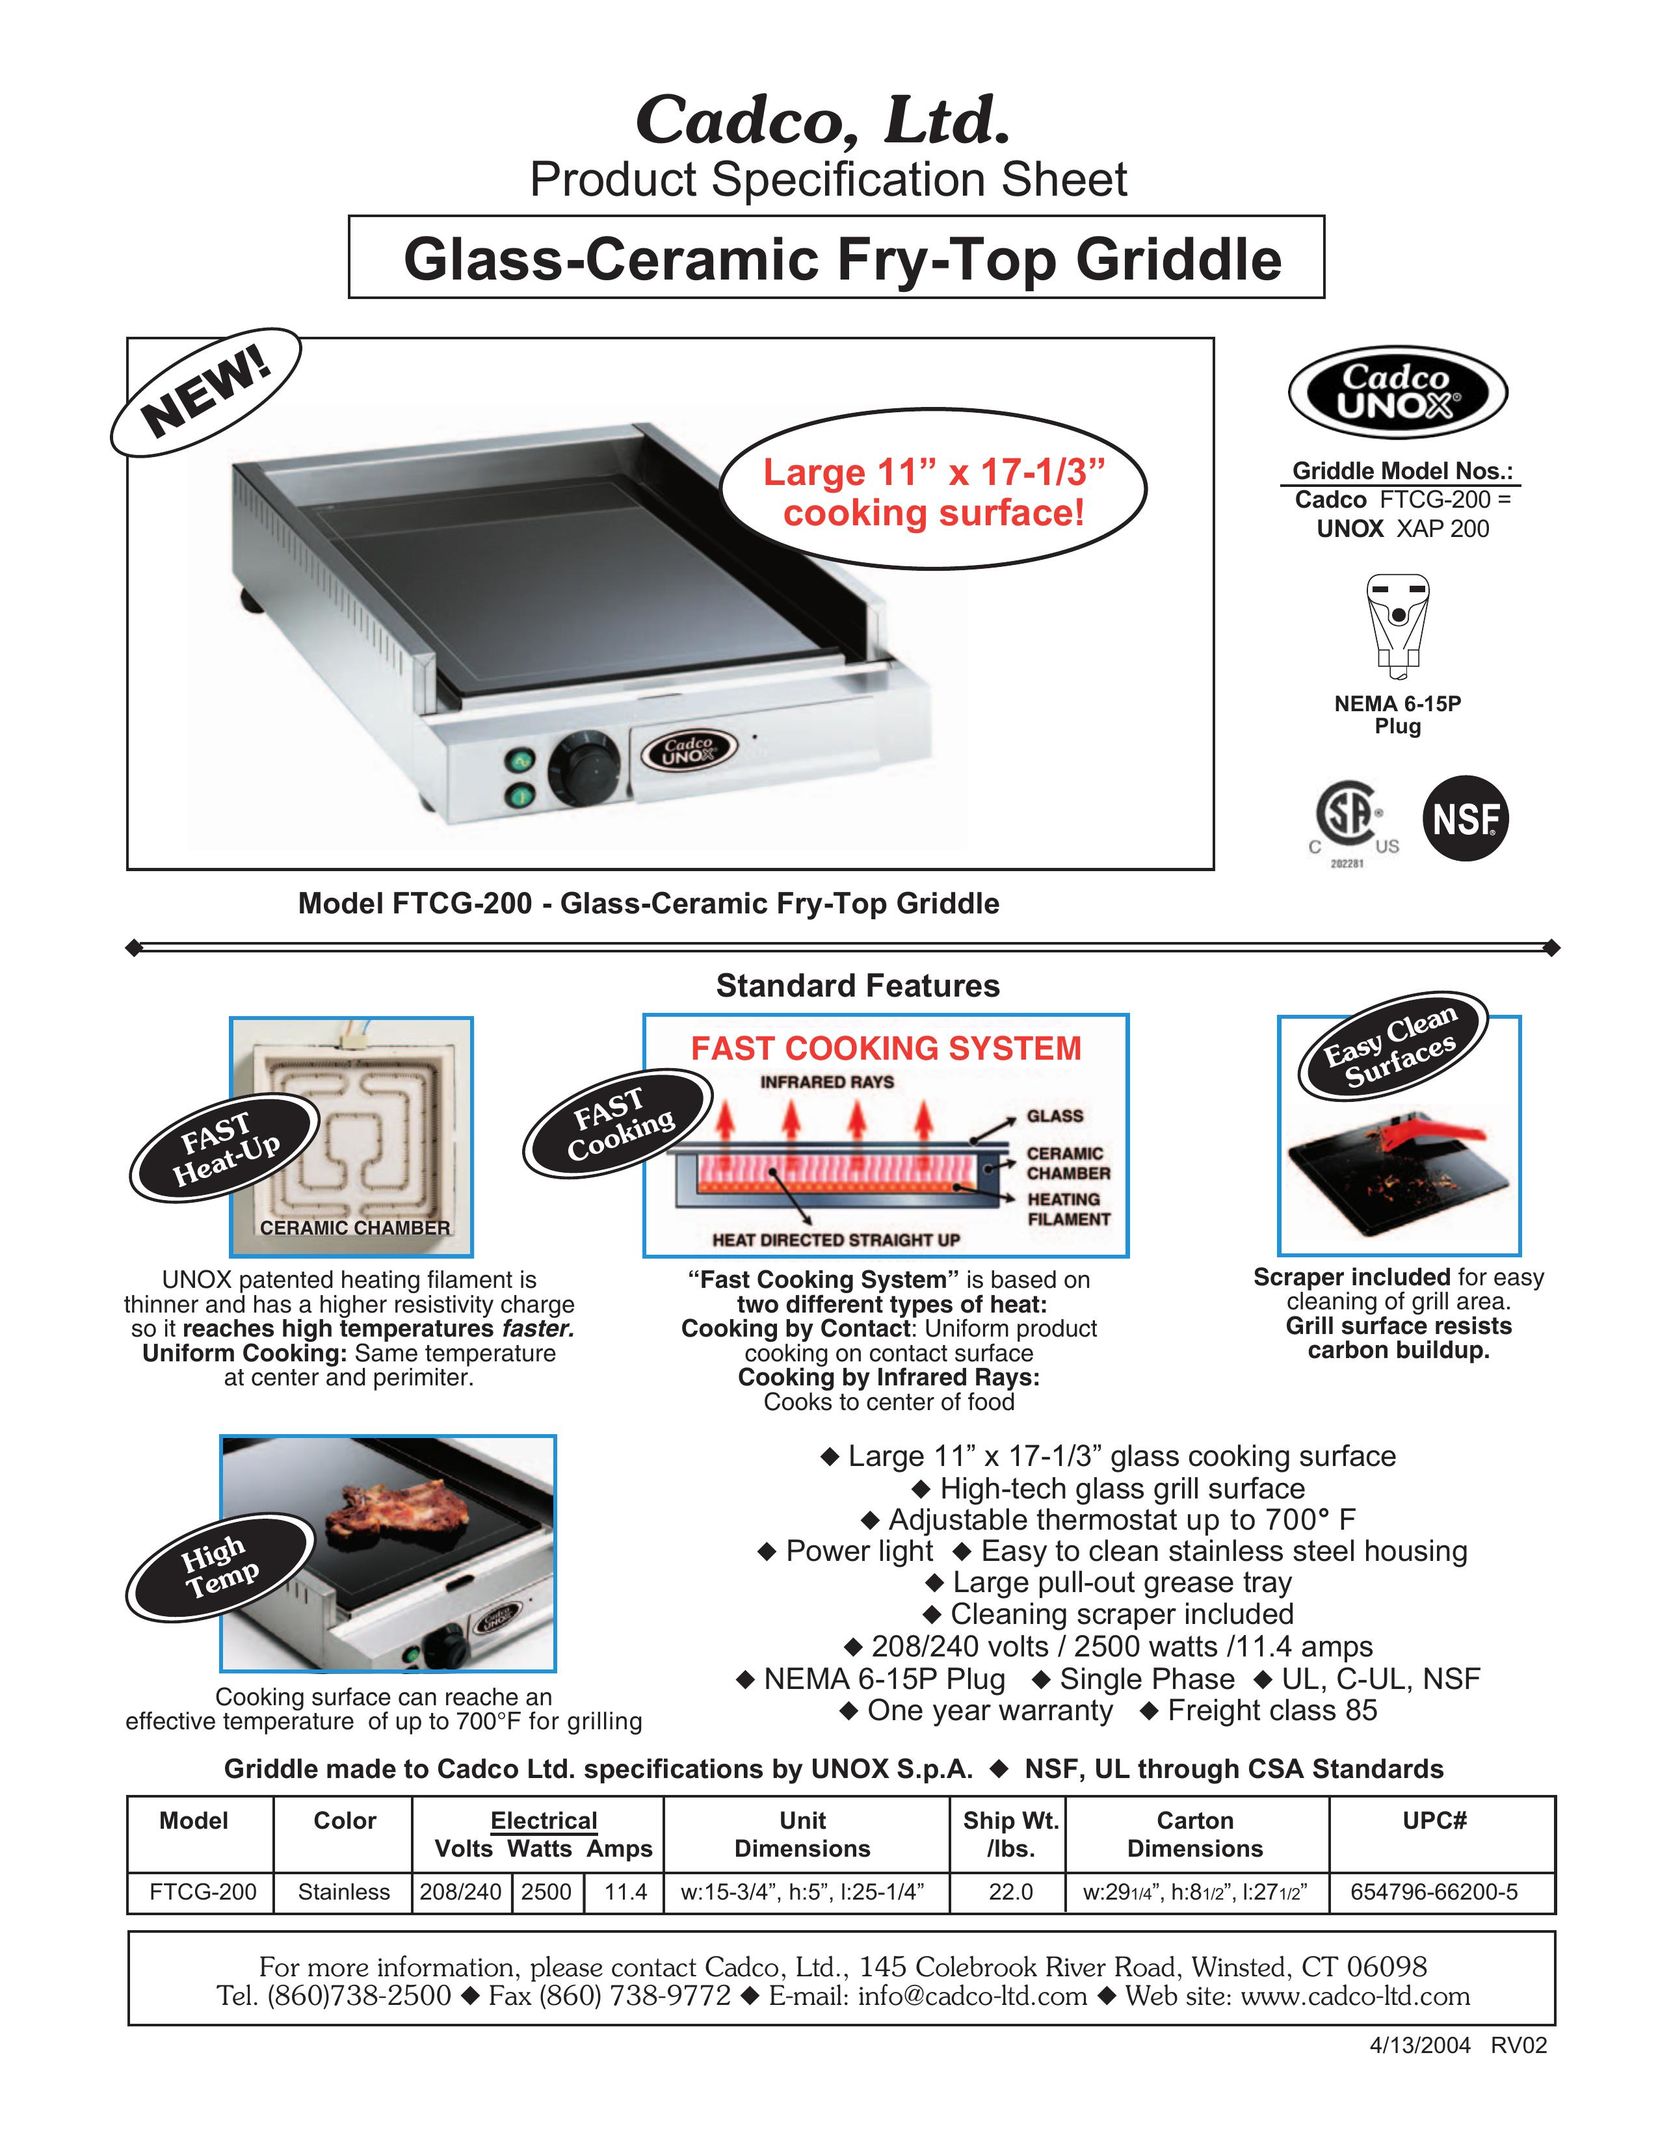 Cadco FTCG-200 Griddle User Manual